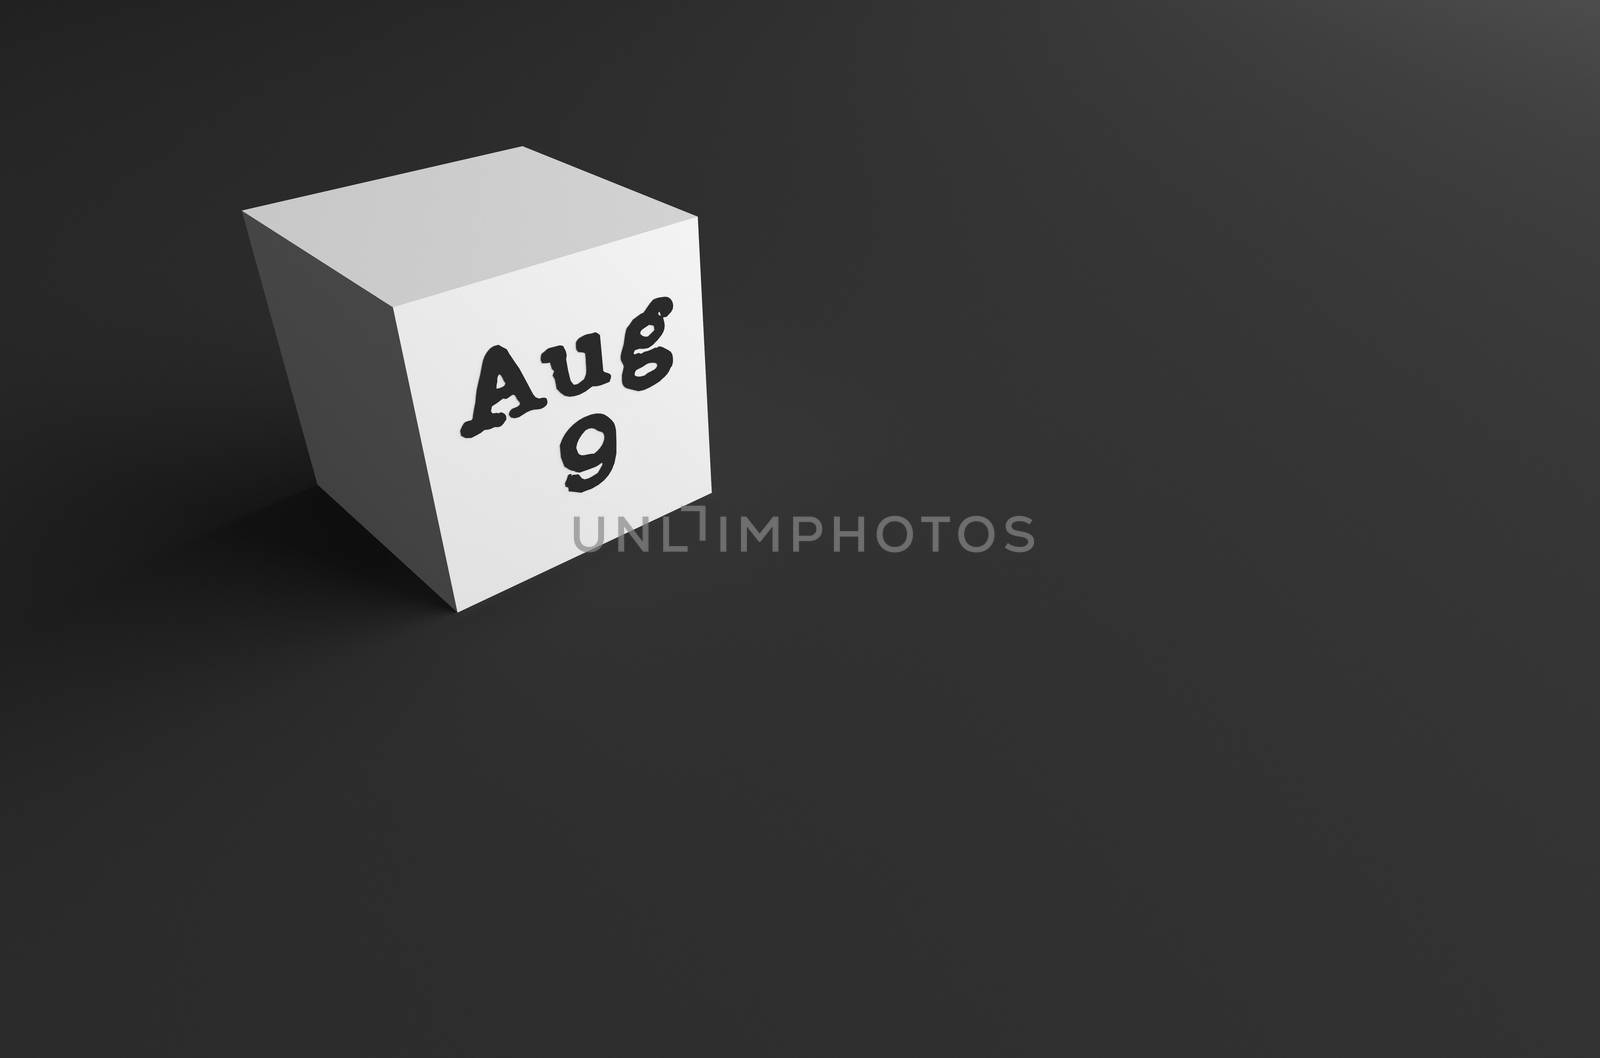 3D RENDERING OF Aug (ABBREVIATION OF AUGUST) 9 ON WHITE CUBE